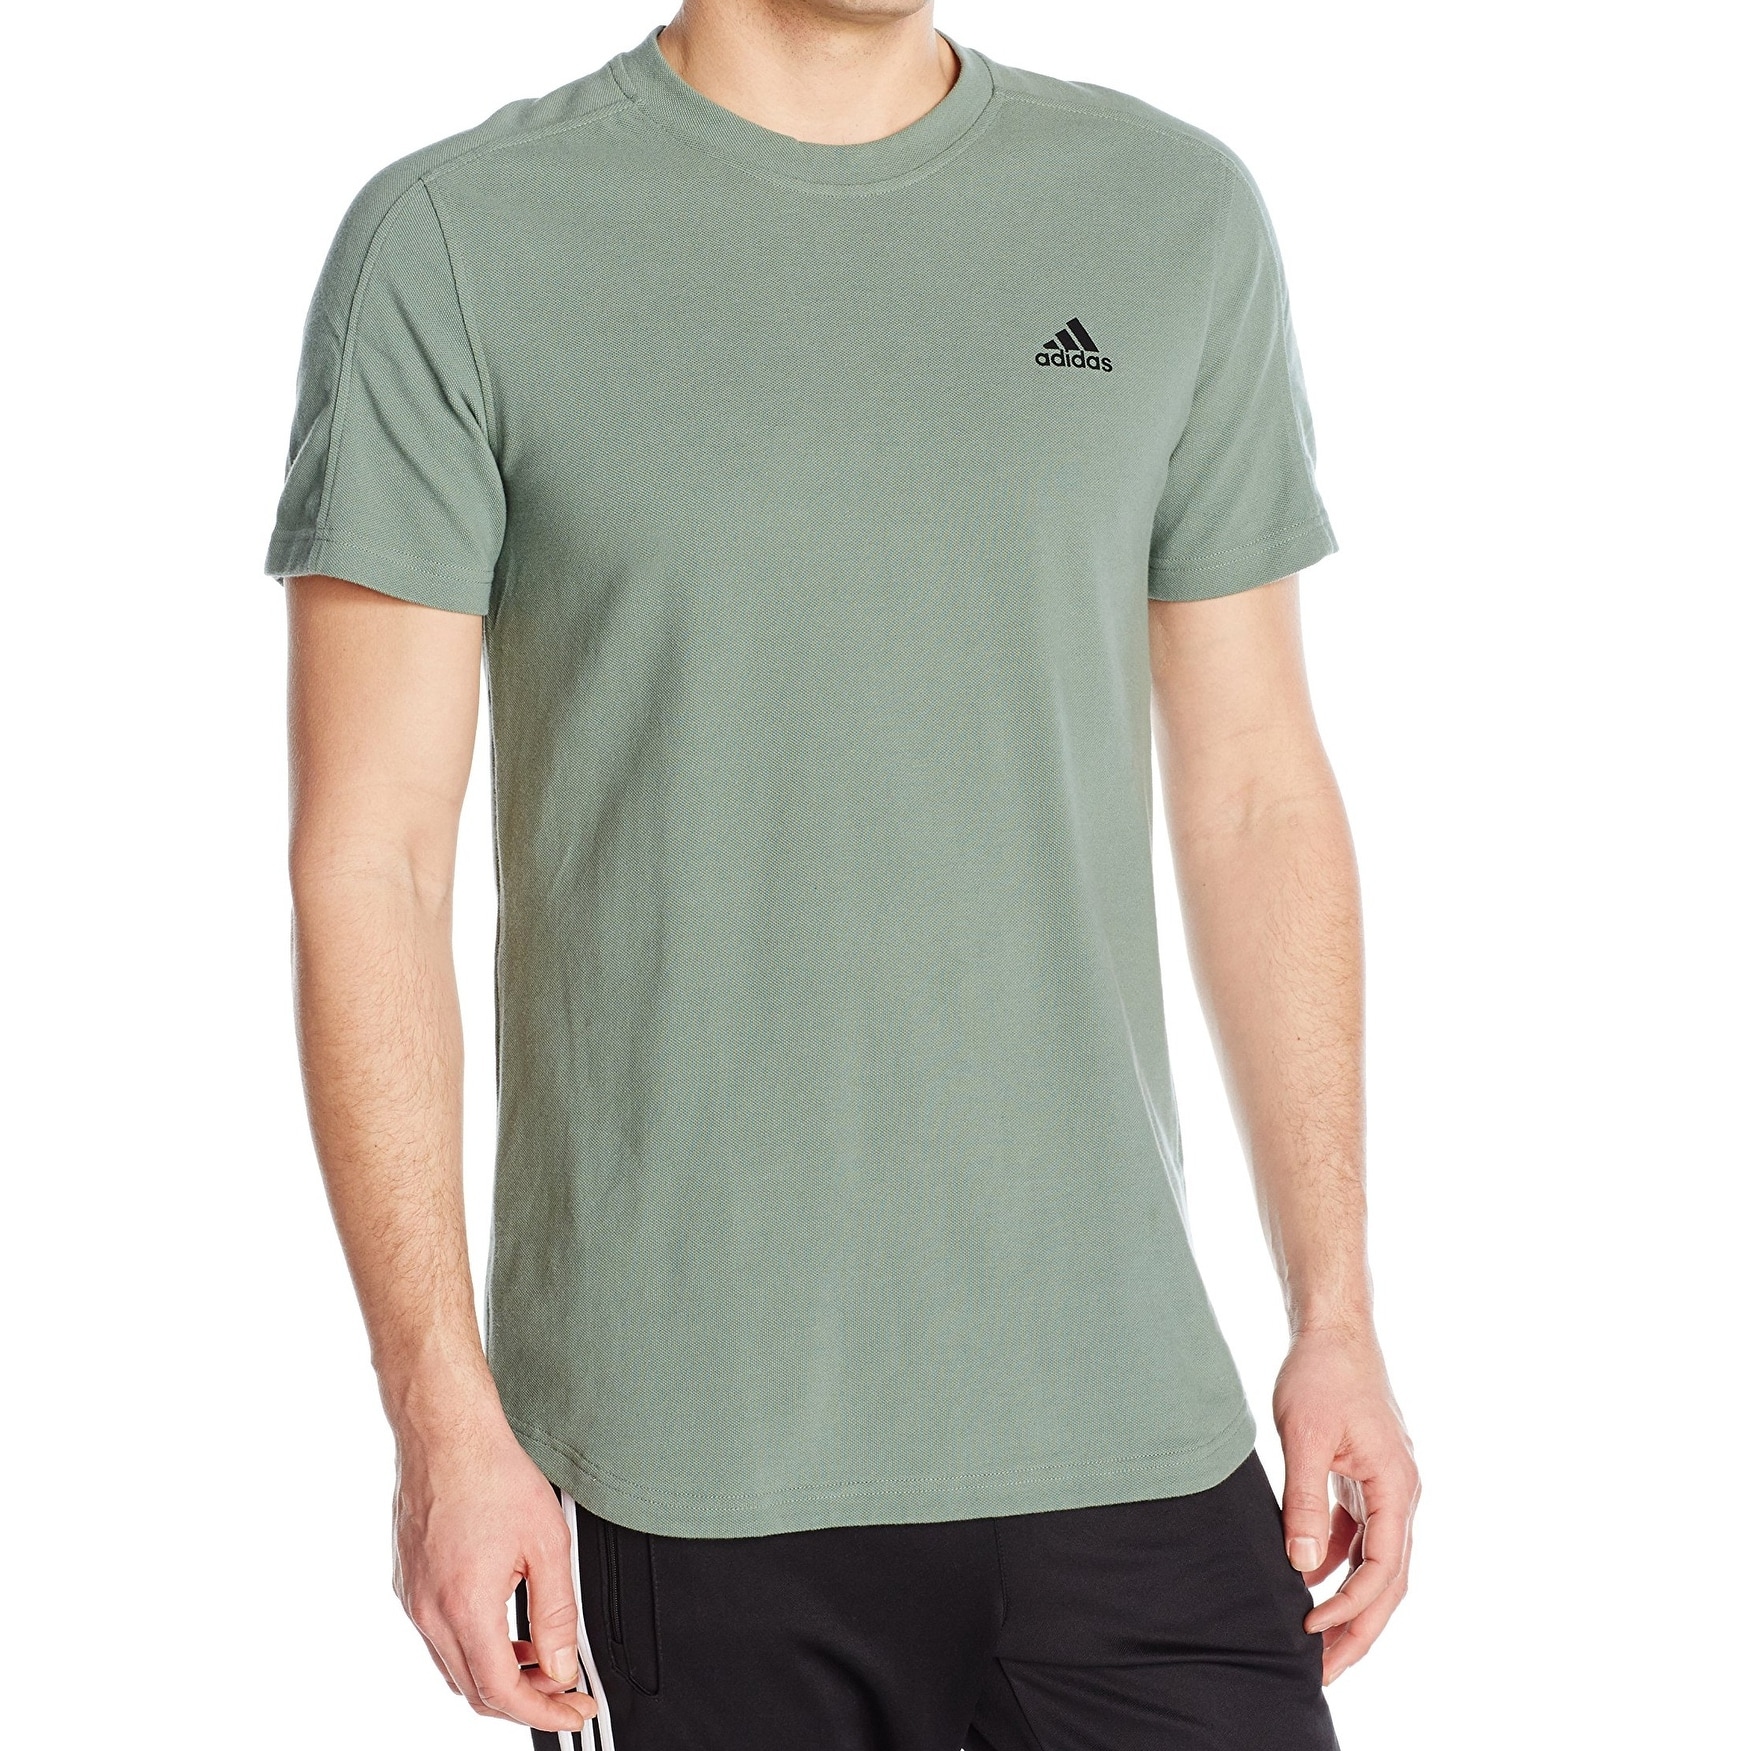 Adidas Olive Green Mens Size Small S 